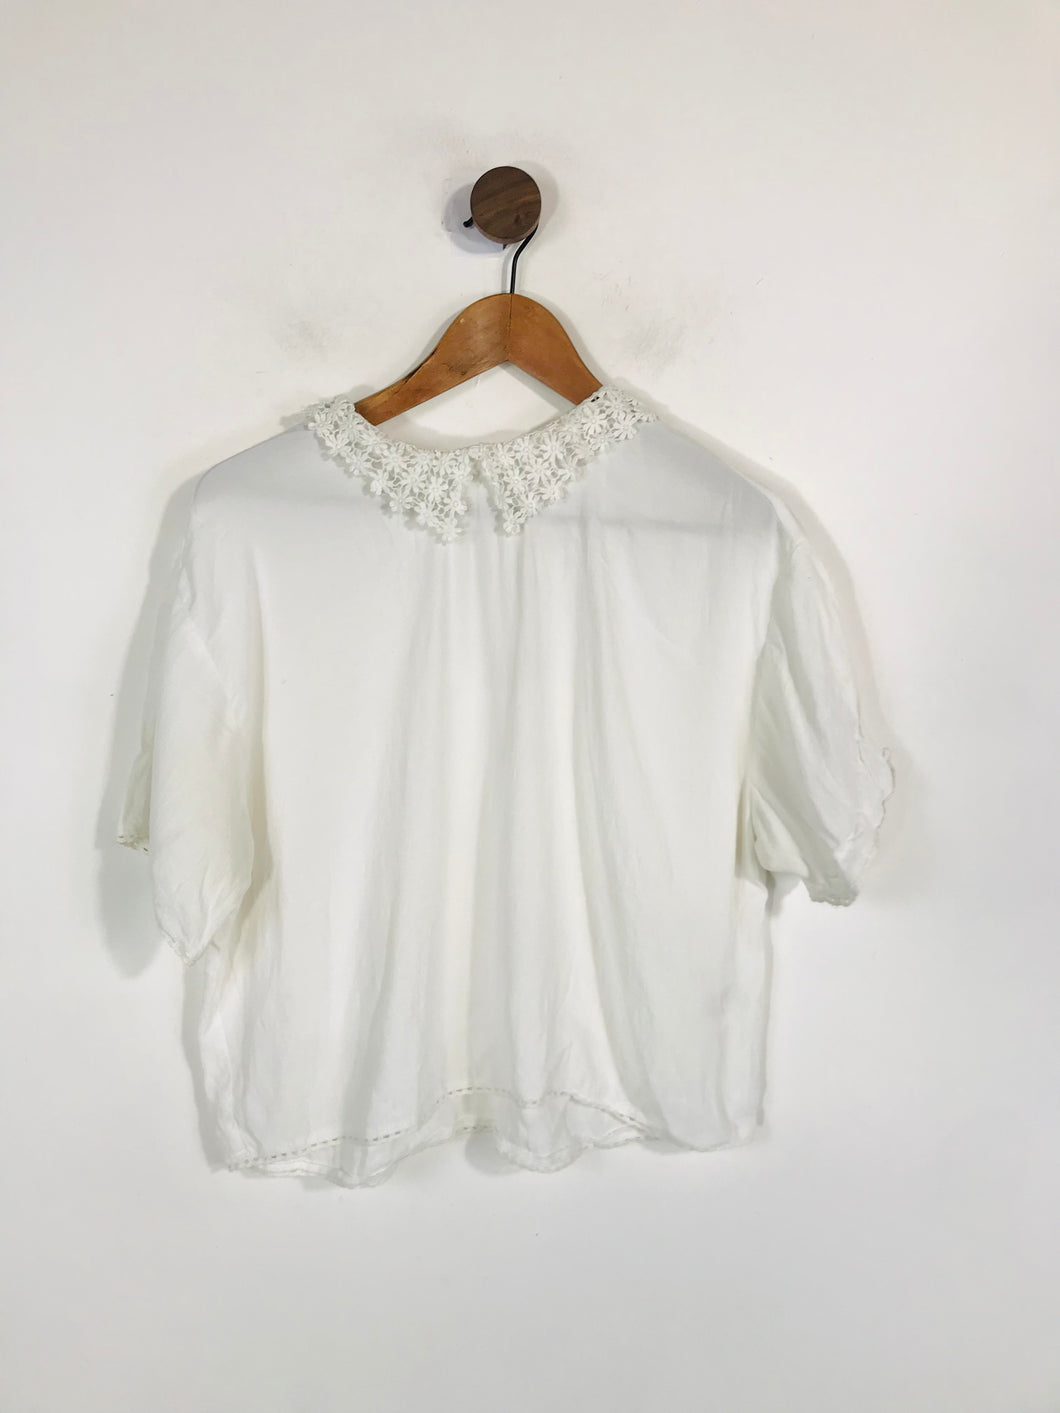 Cooperative Urban Outfitters Women's Boho Lace Blouse | M UK10-12 | White